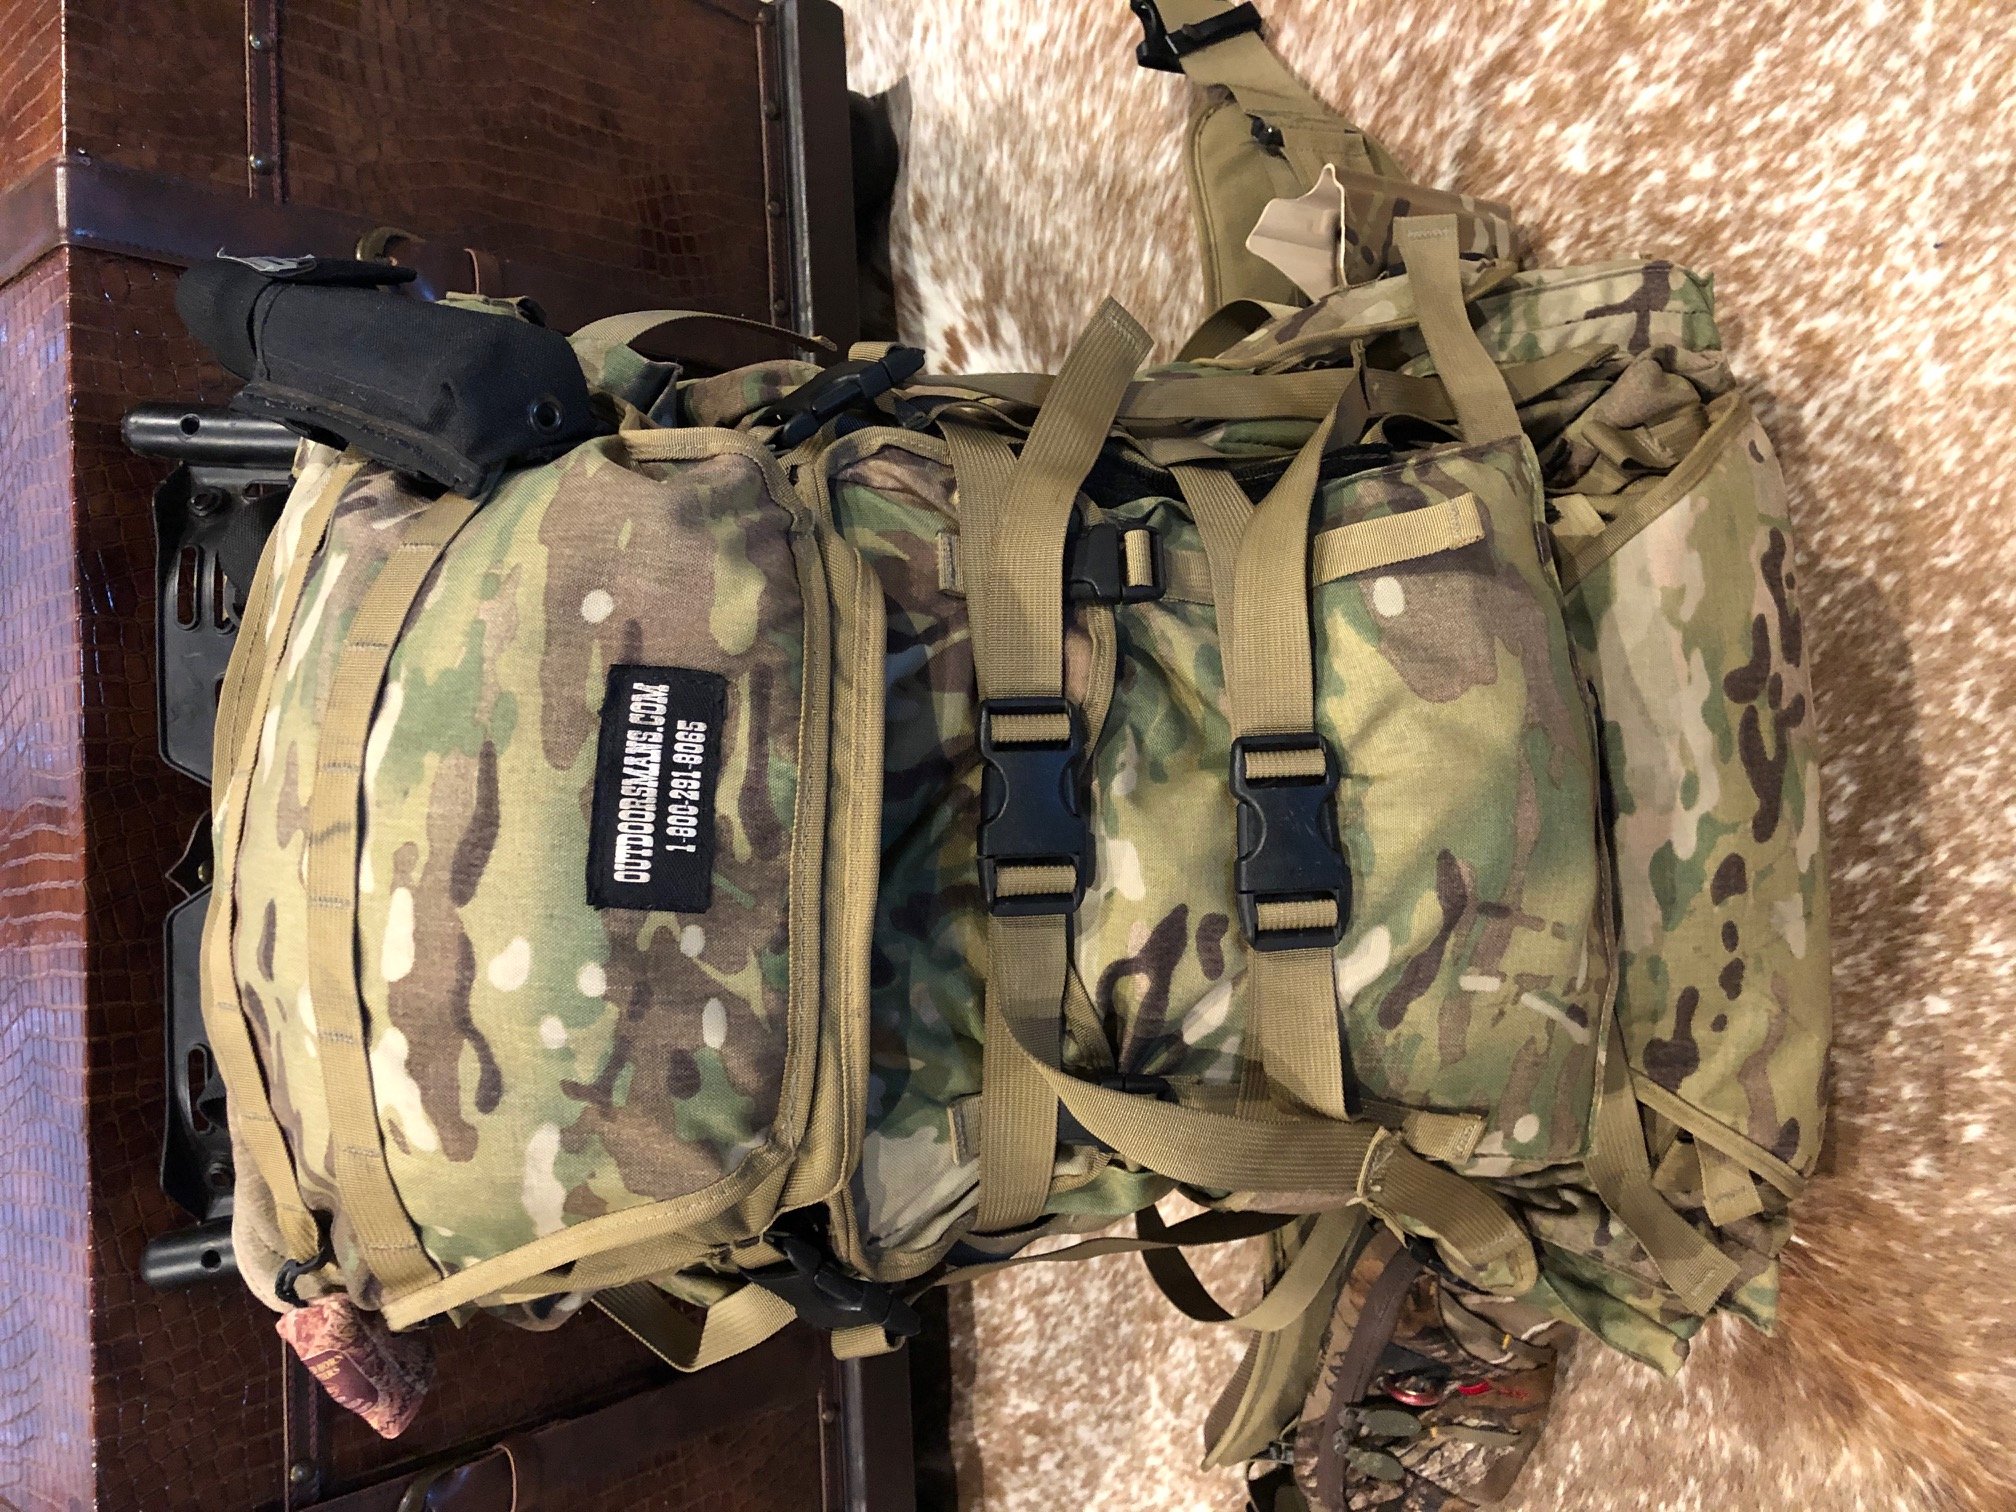 Outdoorsmans Optics Hunter Pack for sale - Classified Ads ...